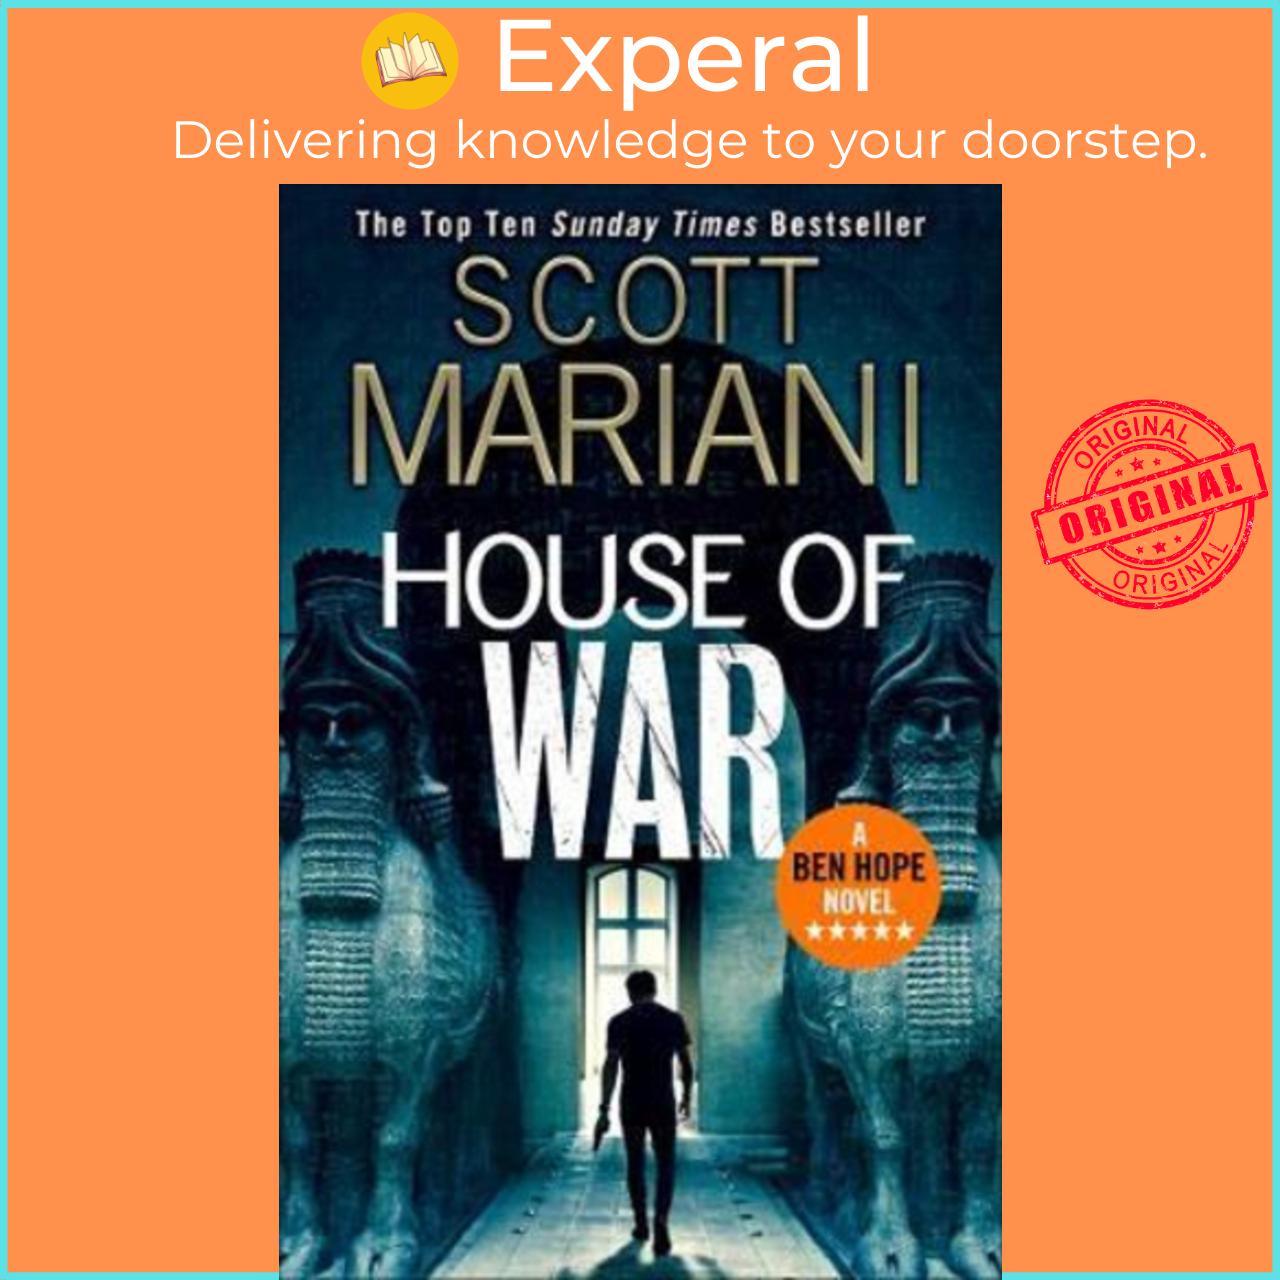 Sách - House of War by Scott Mariani (UK edition, paperback)